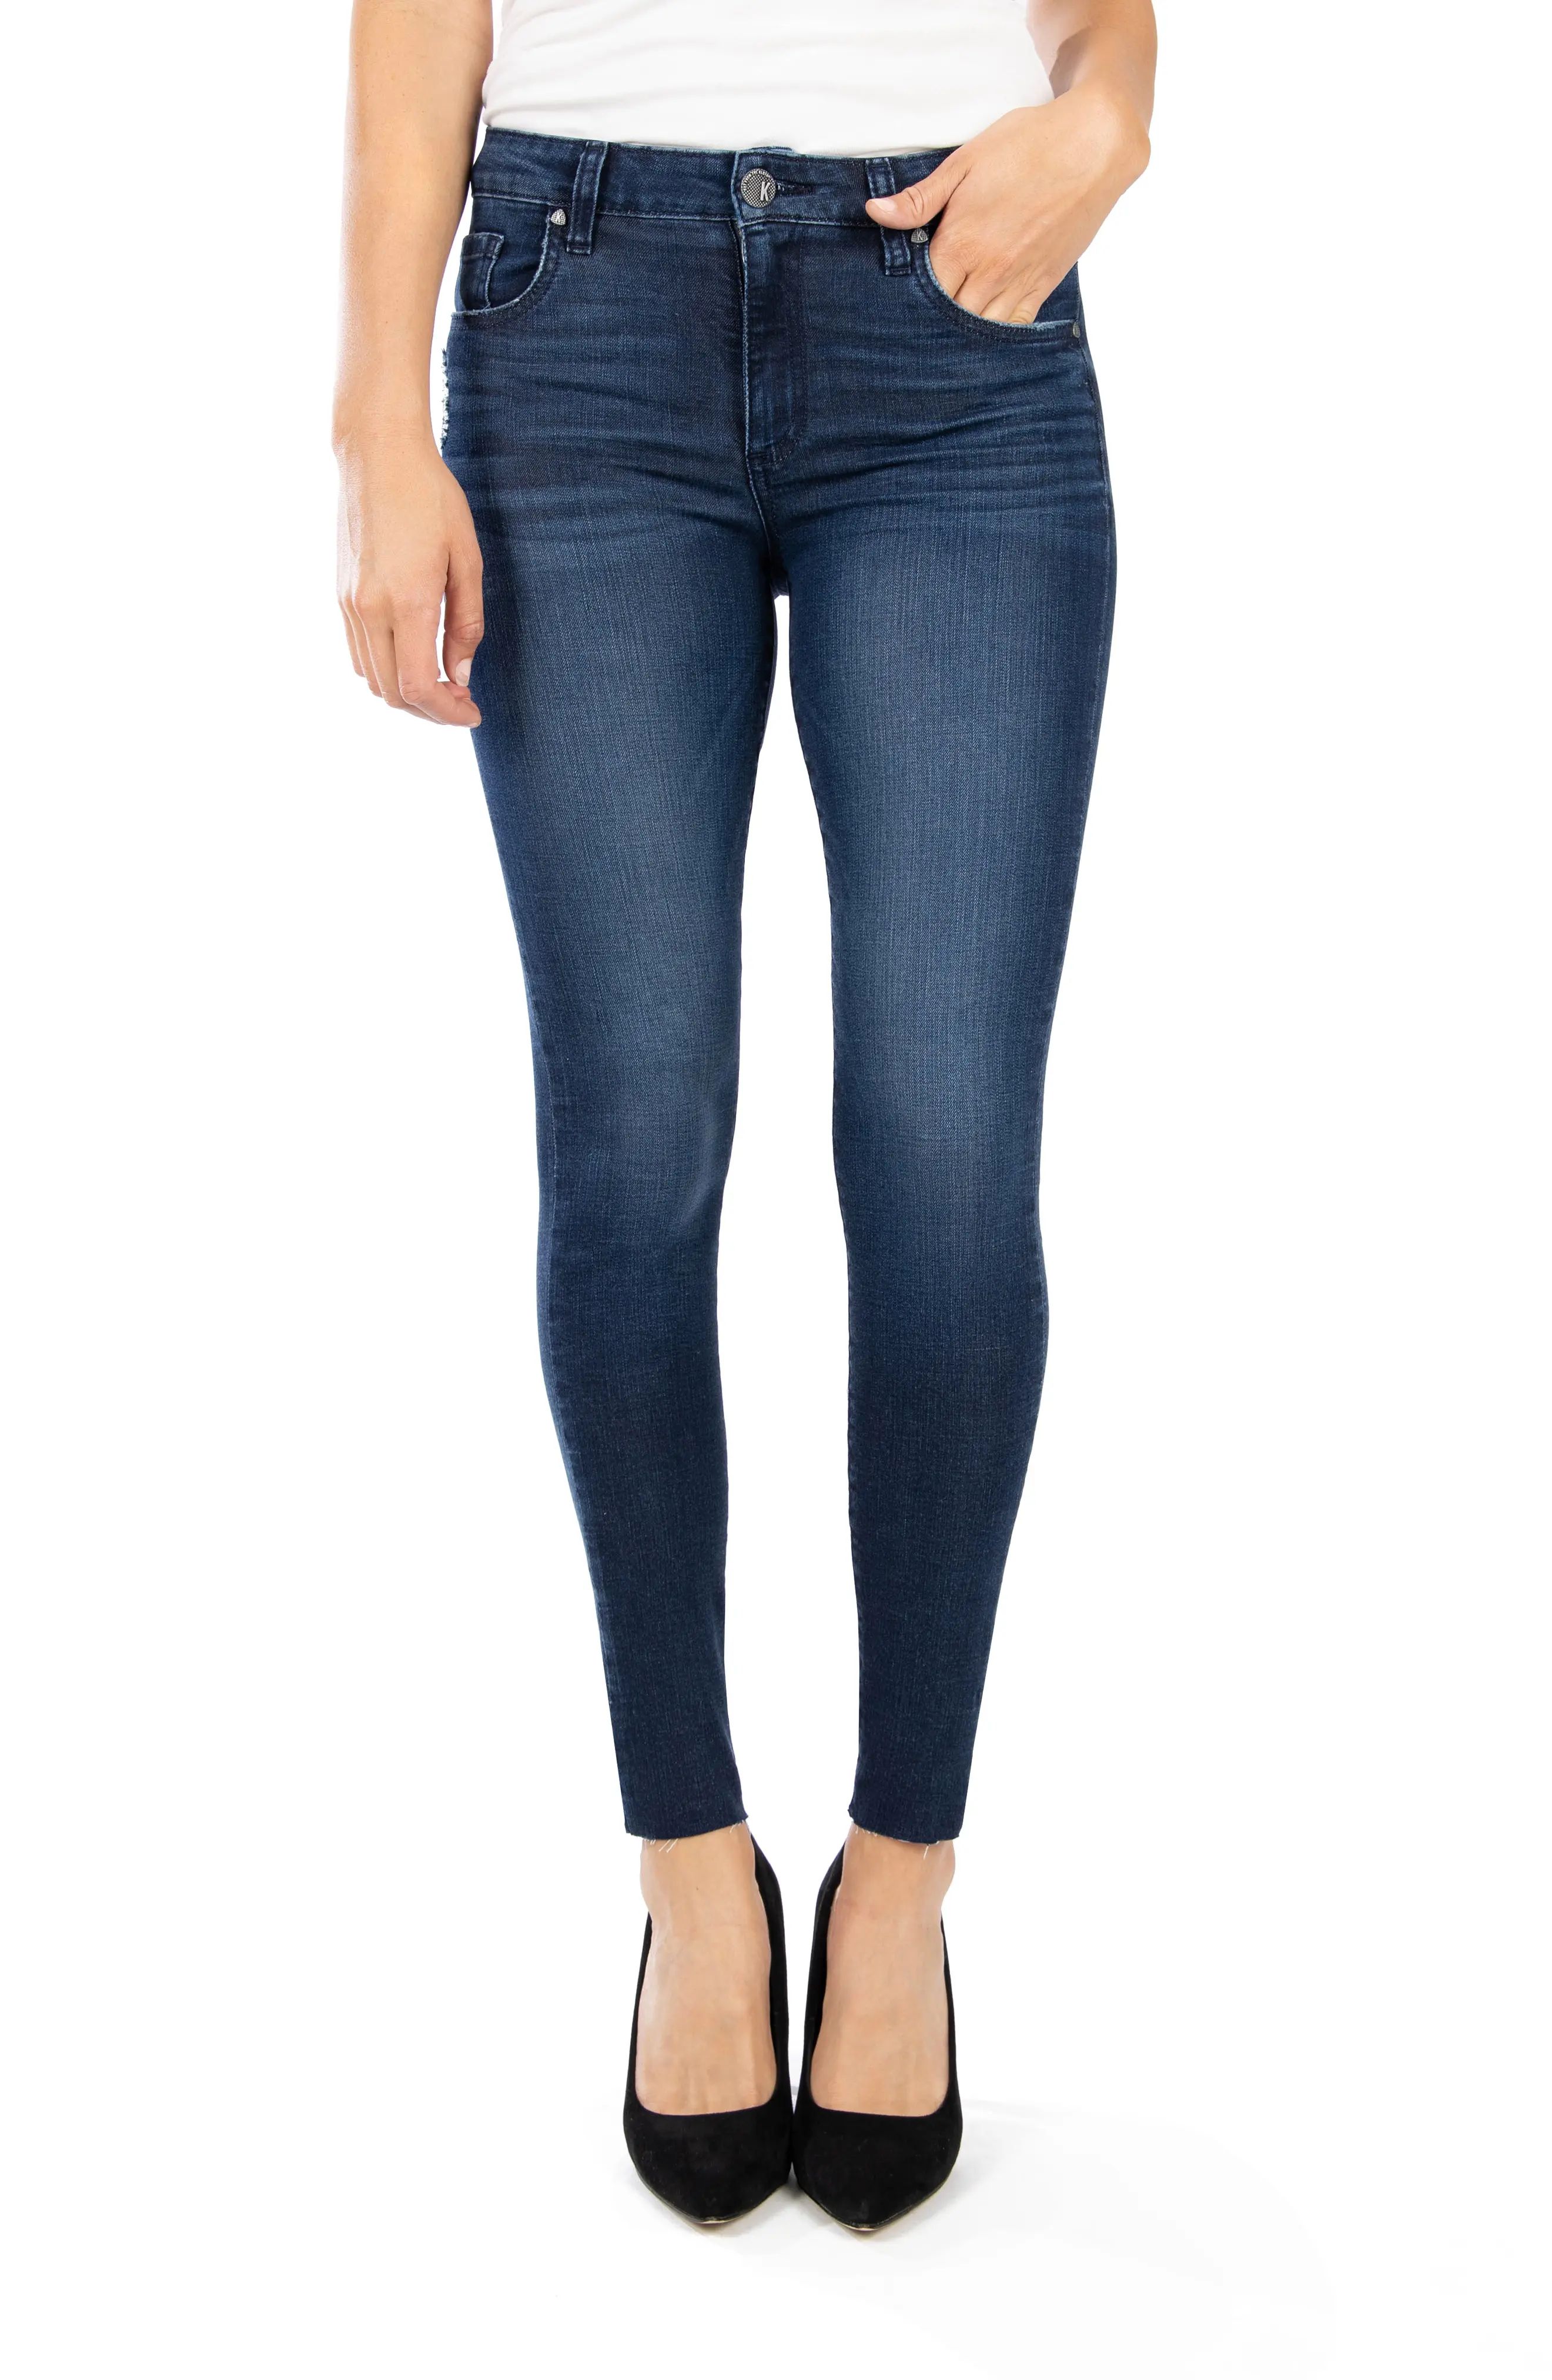 Women's Kut From The Kloth Donna High Waist Raw Hem Ankle Skinny Jeans, Size 6 - Blue | Nordstrom